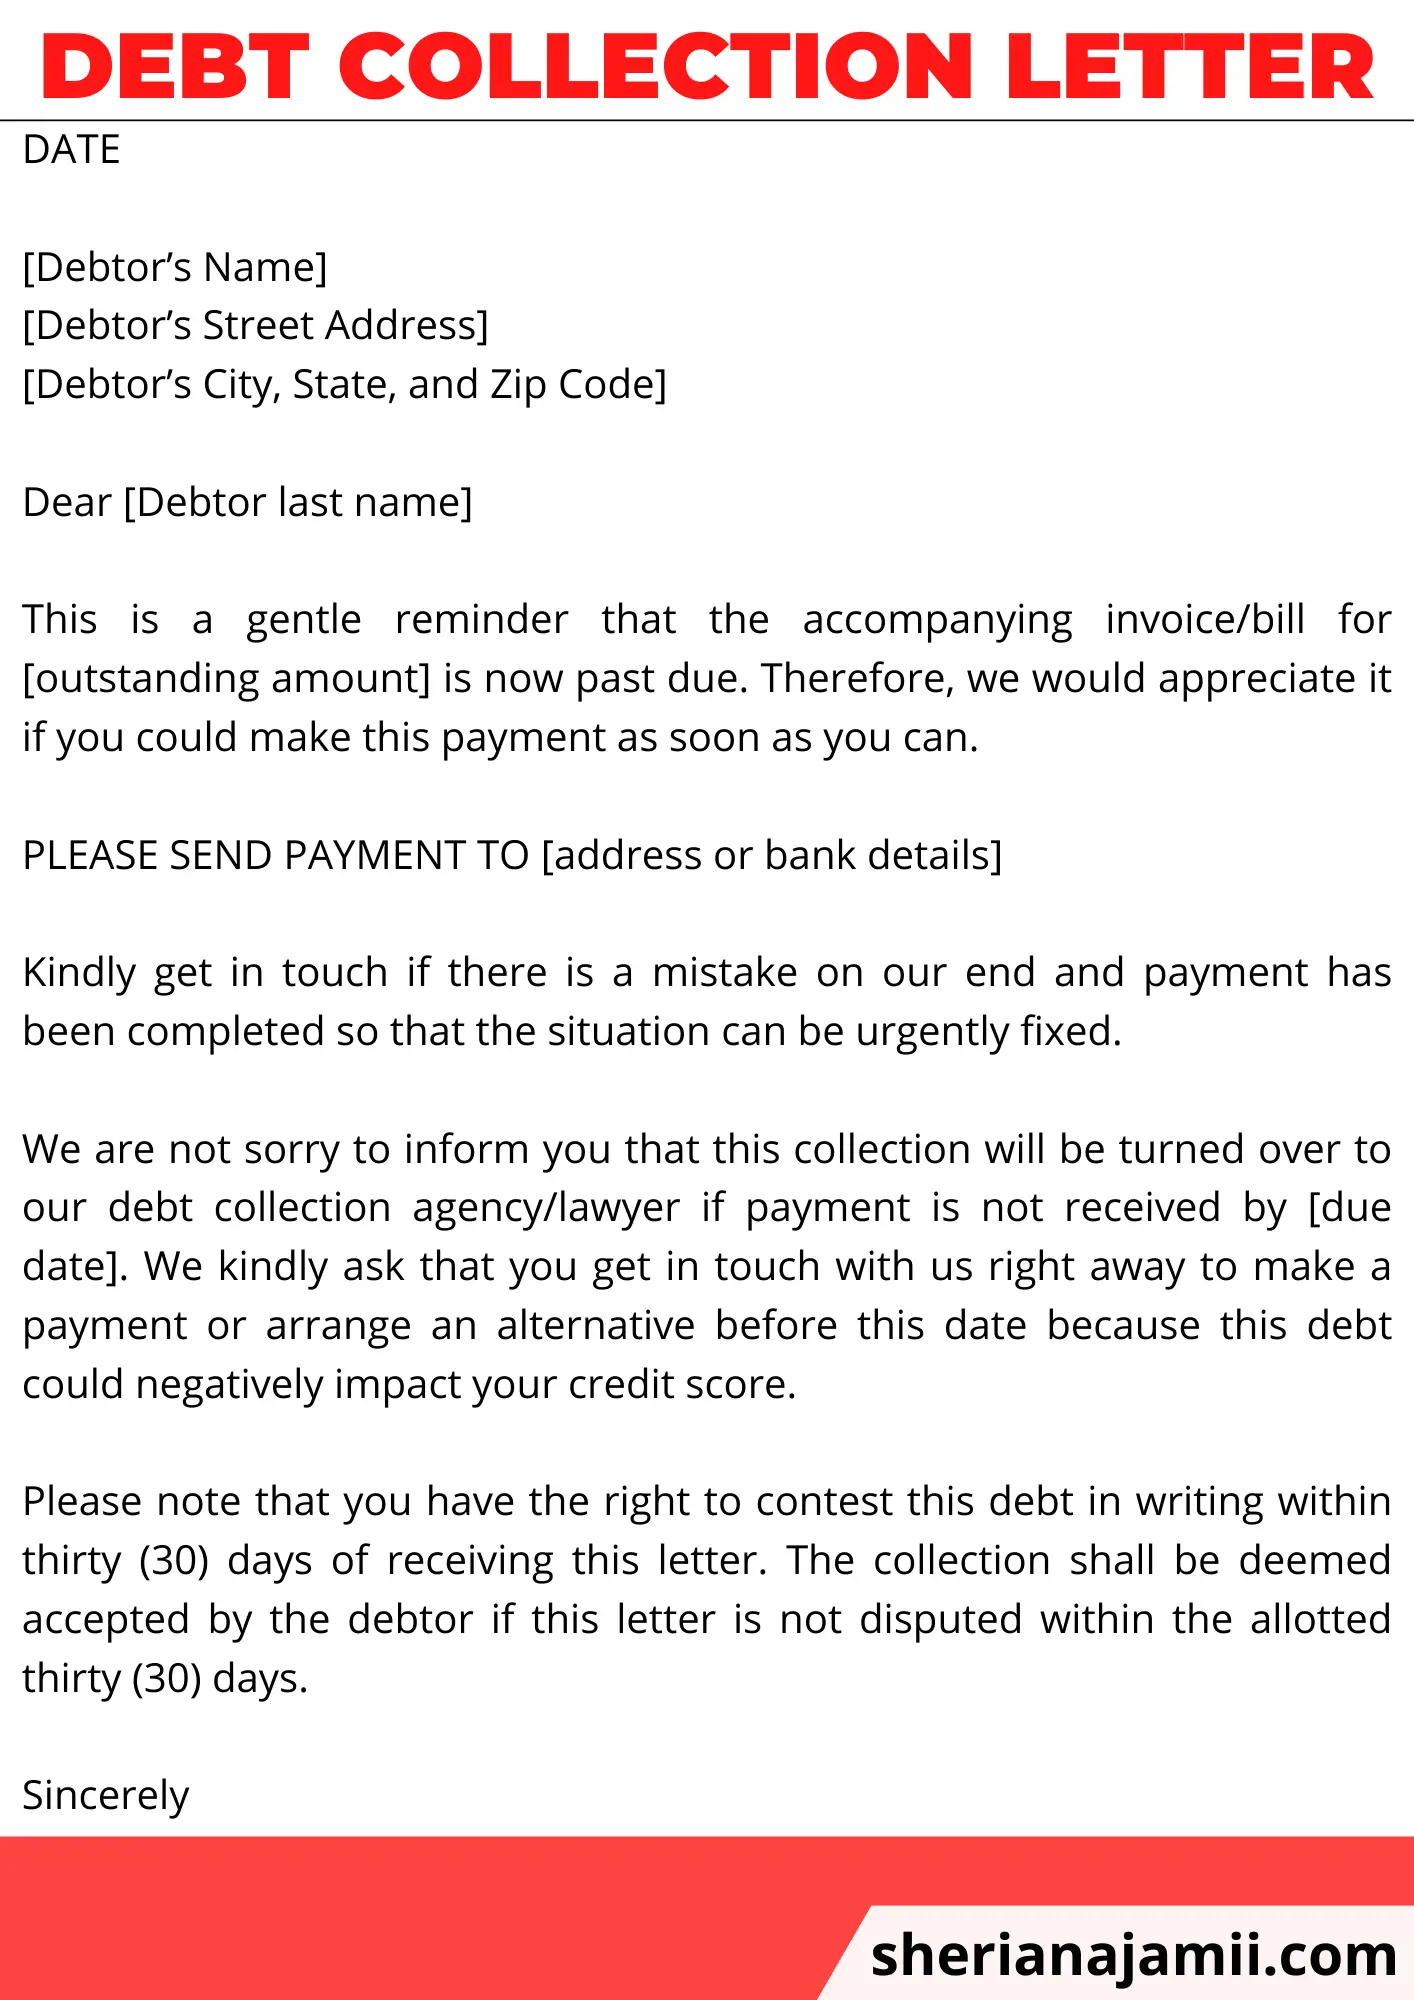 Debt collection letter, Debt collection letter template, Debt collection letter sample, Debt collection letter example